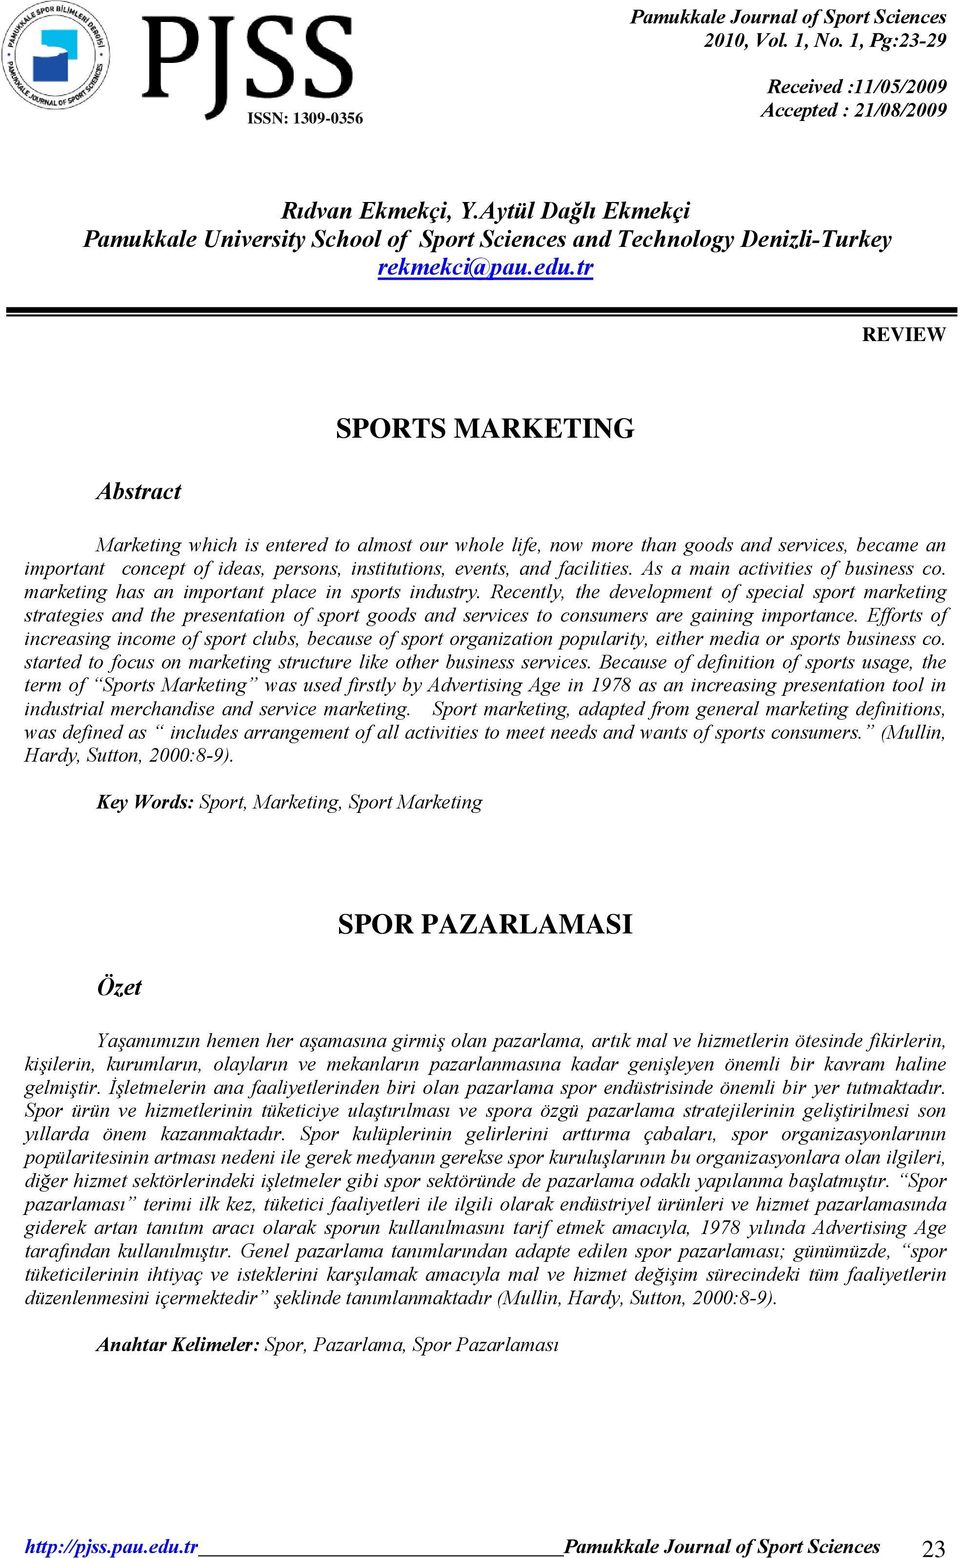 tr REVIEW Abstract SPORTS MARKETING Marketing which is entered to almost our whole life, now more than goods and services, became an important concept of ideas, persons, institutions, events, and